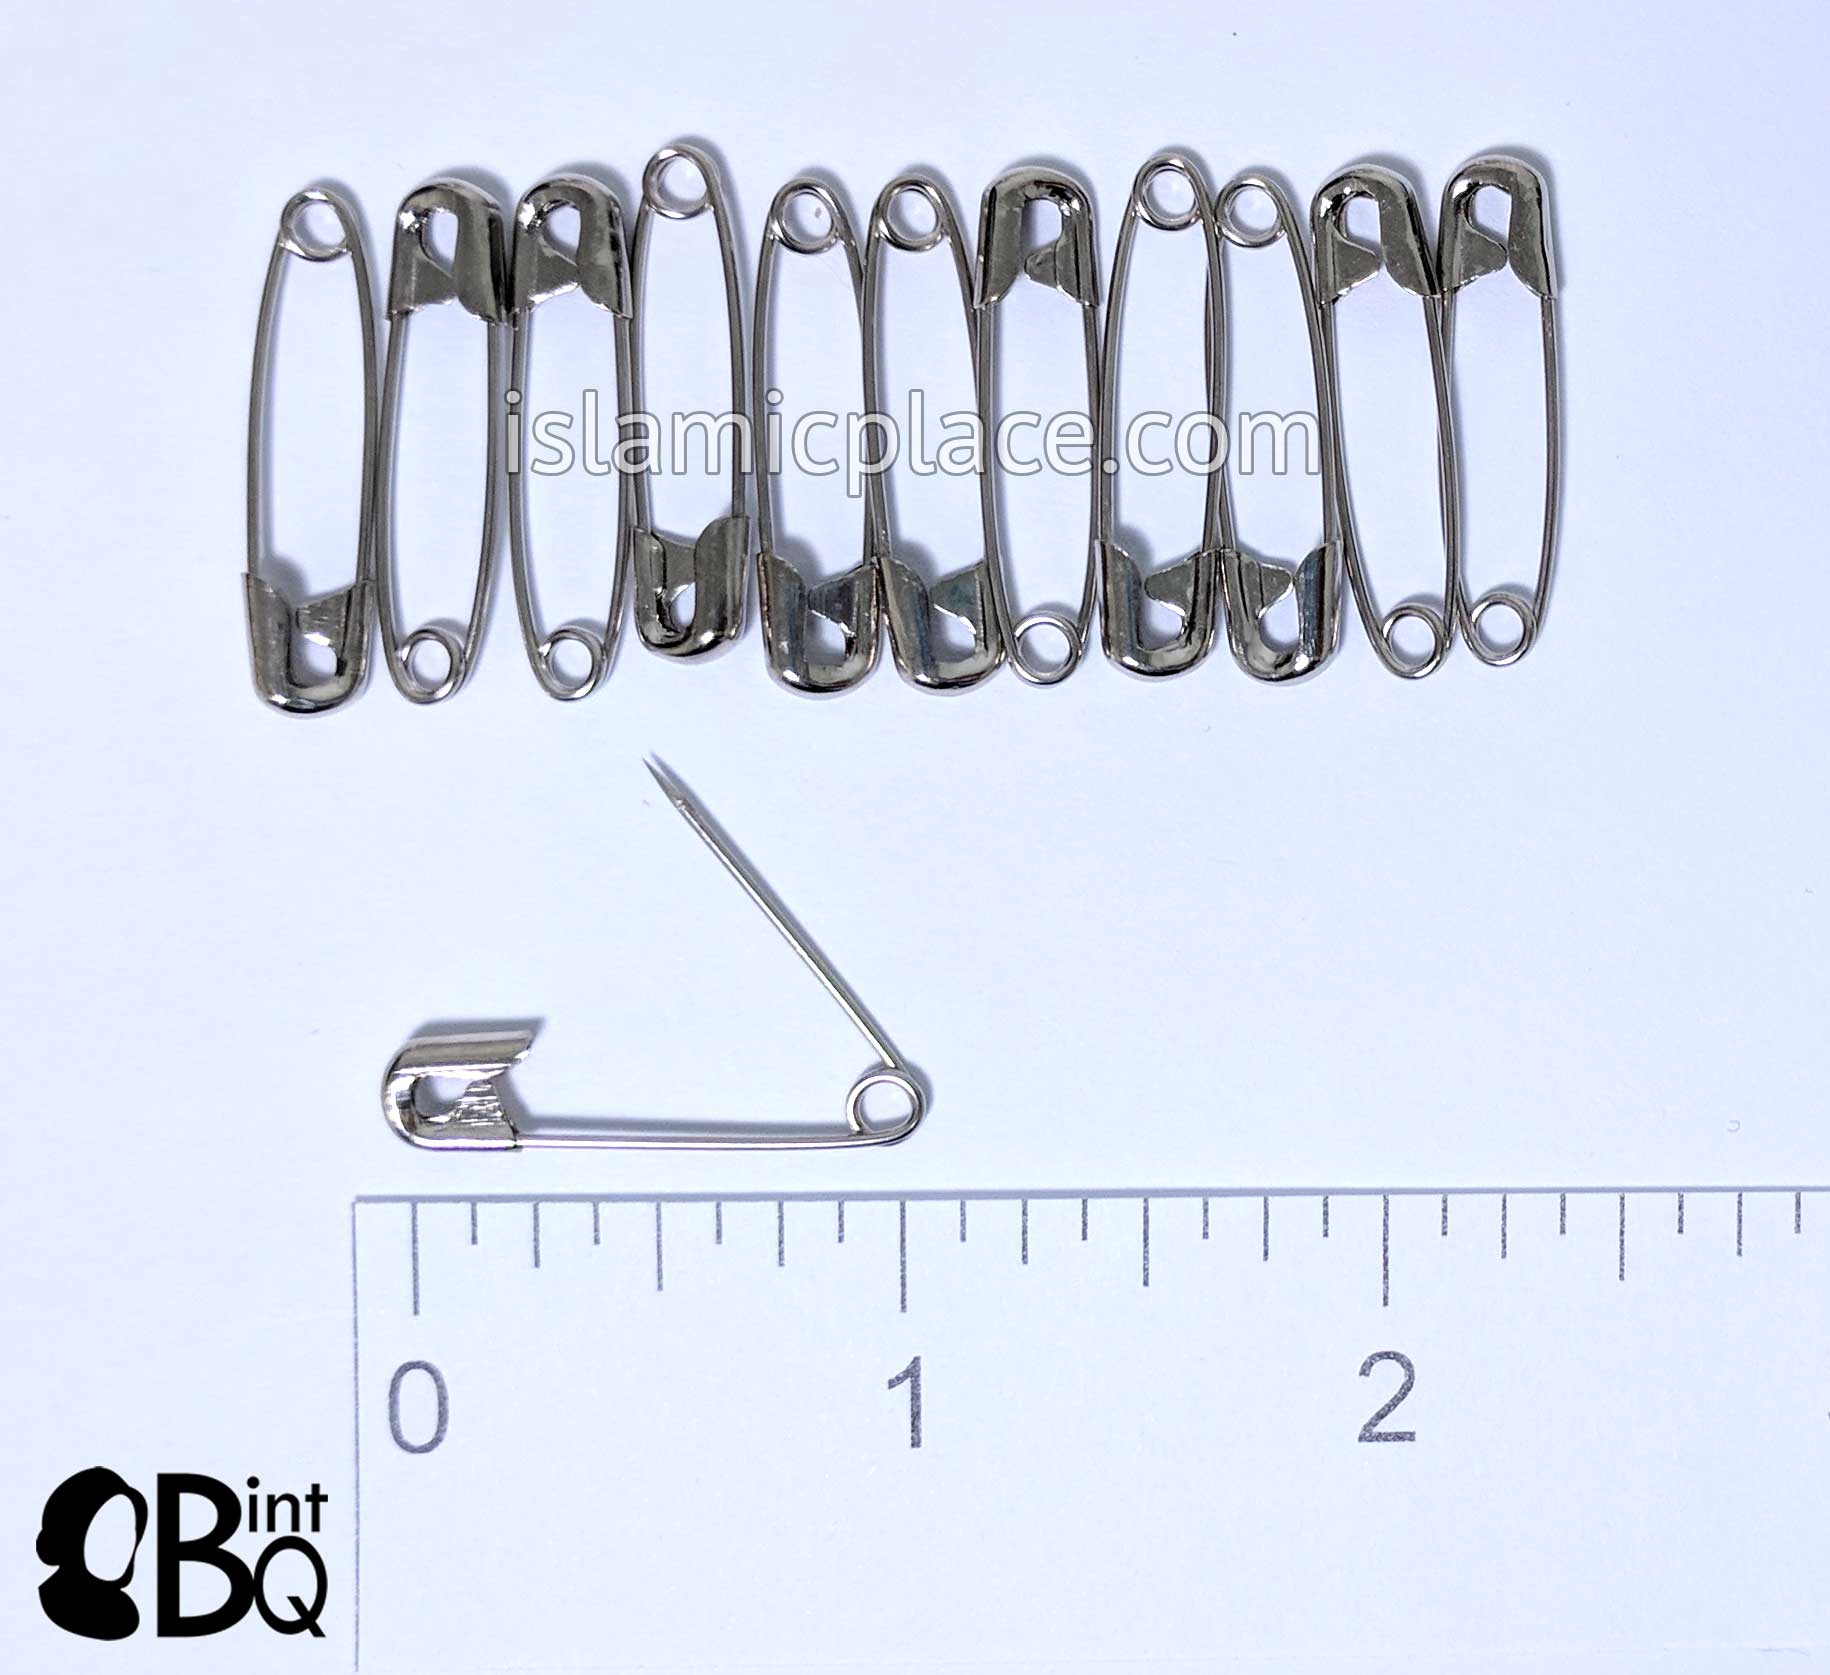 Strong Safety Pins Pack $ 1.25 - The Islamic Place